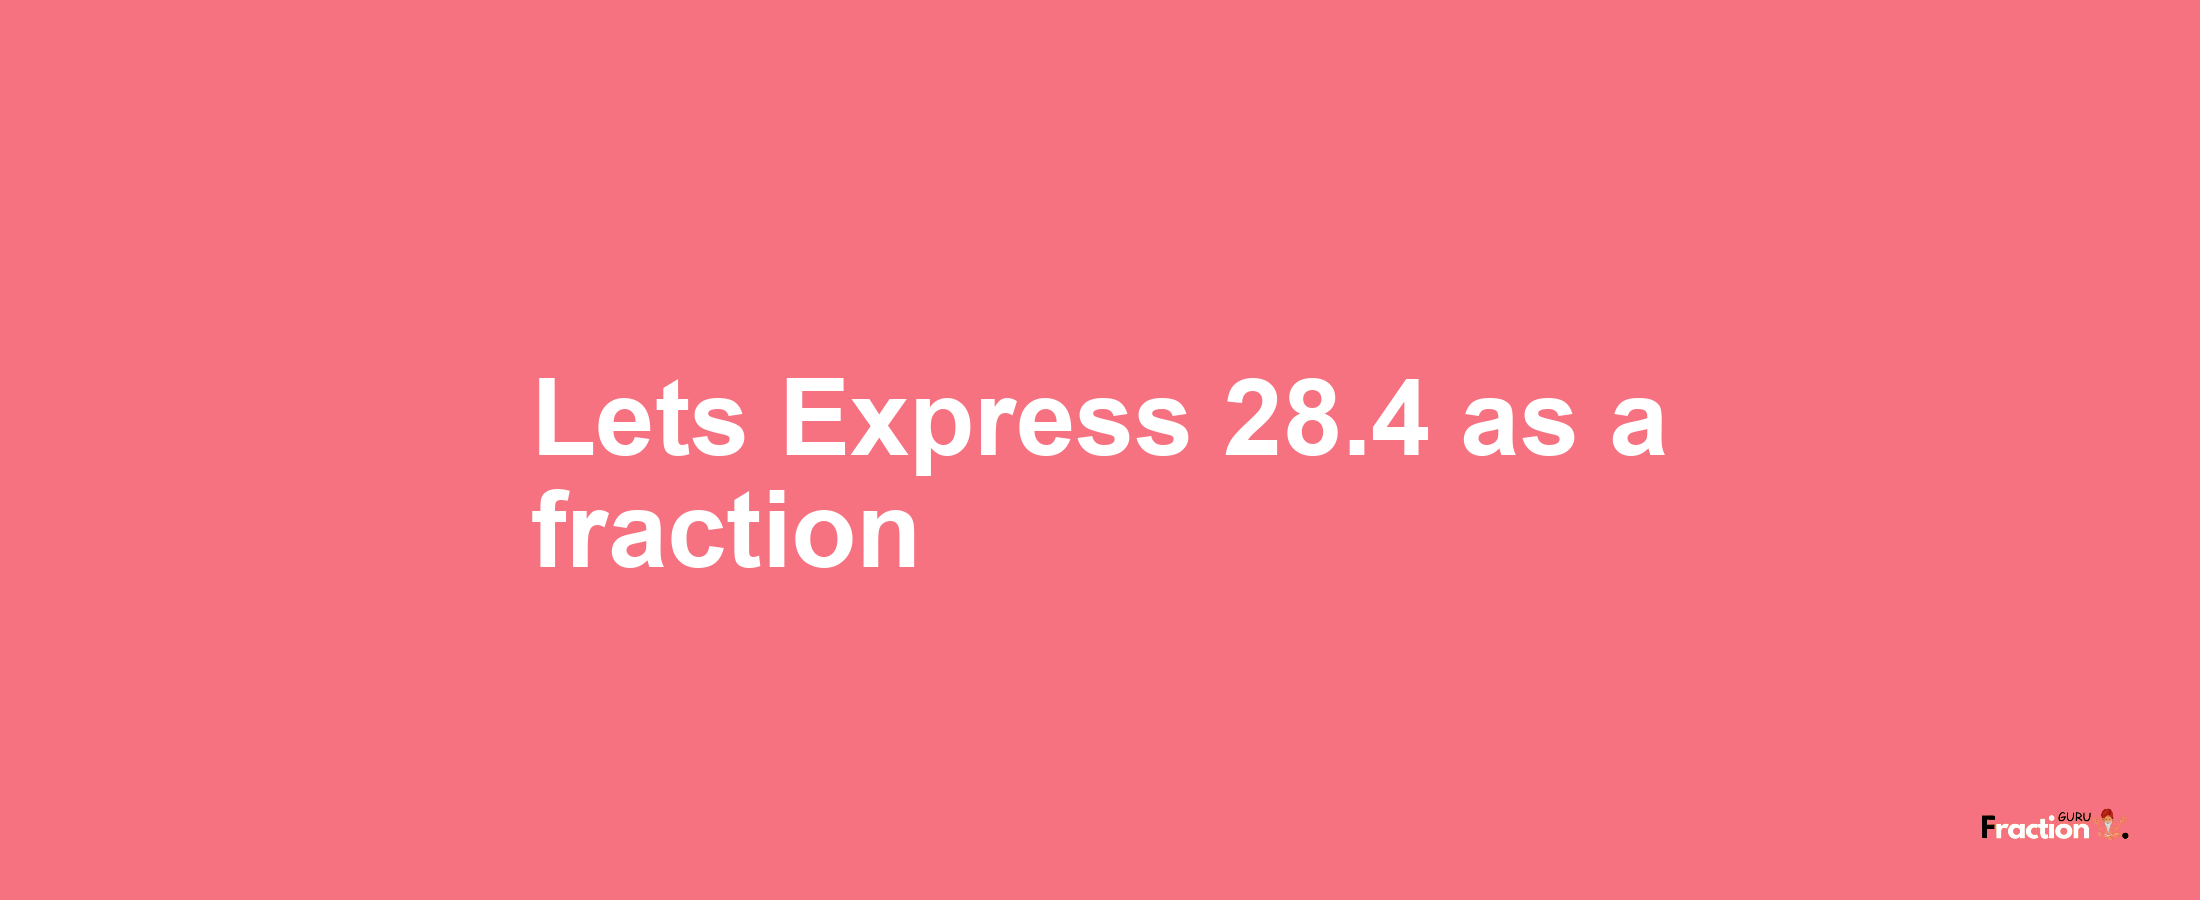 Lets Express 28.4 as afraction